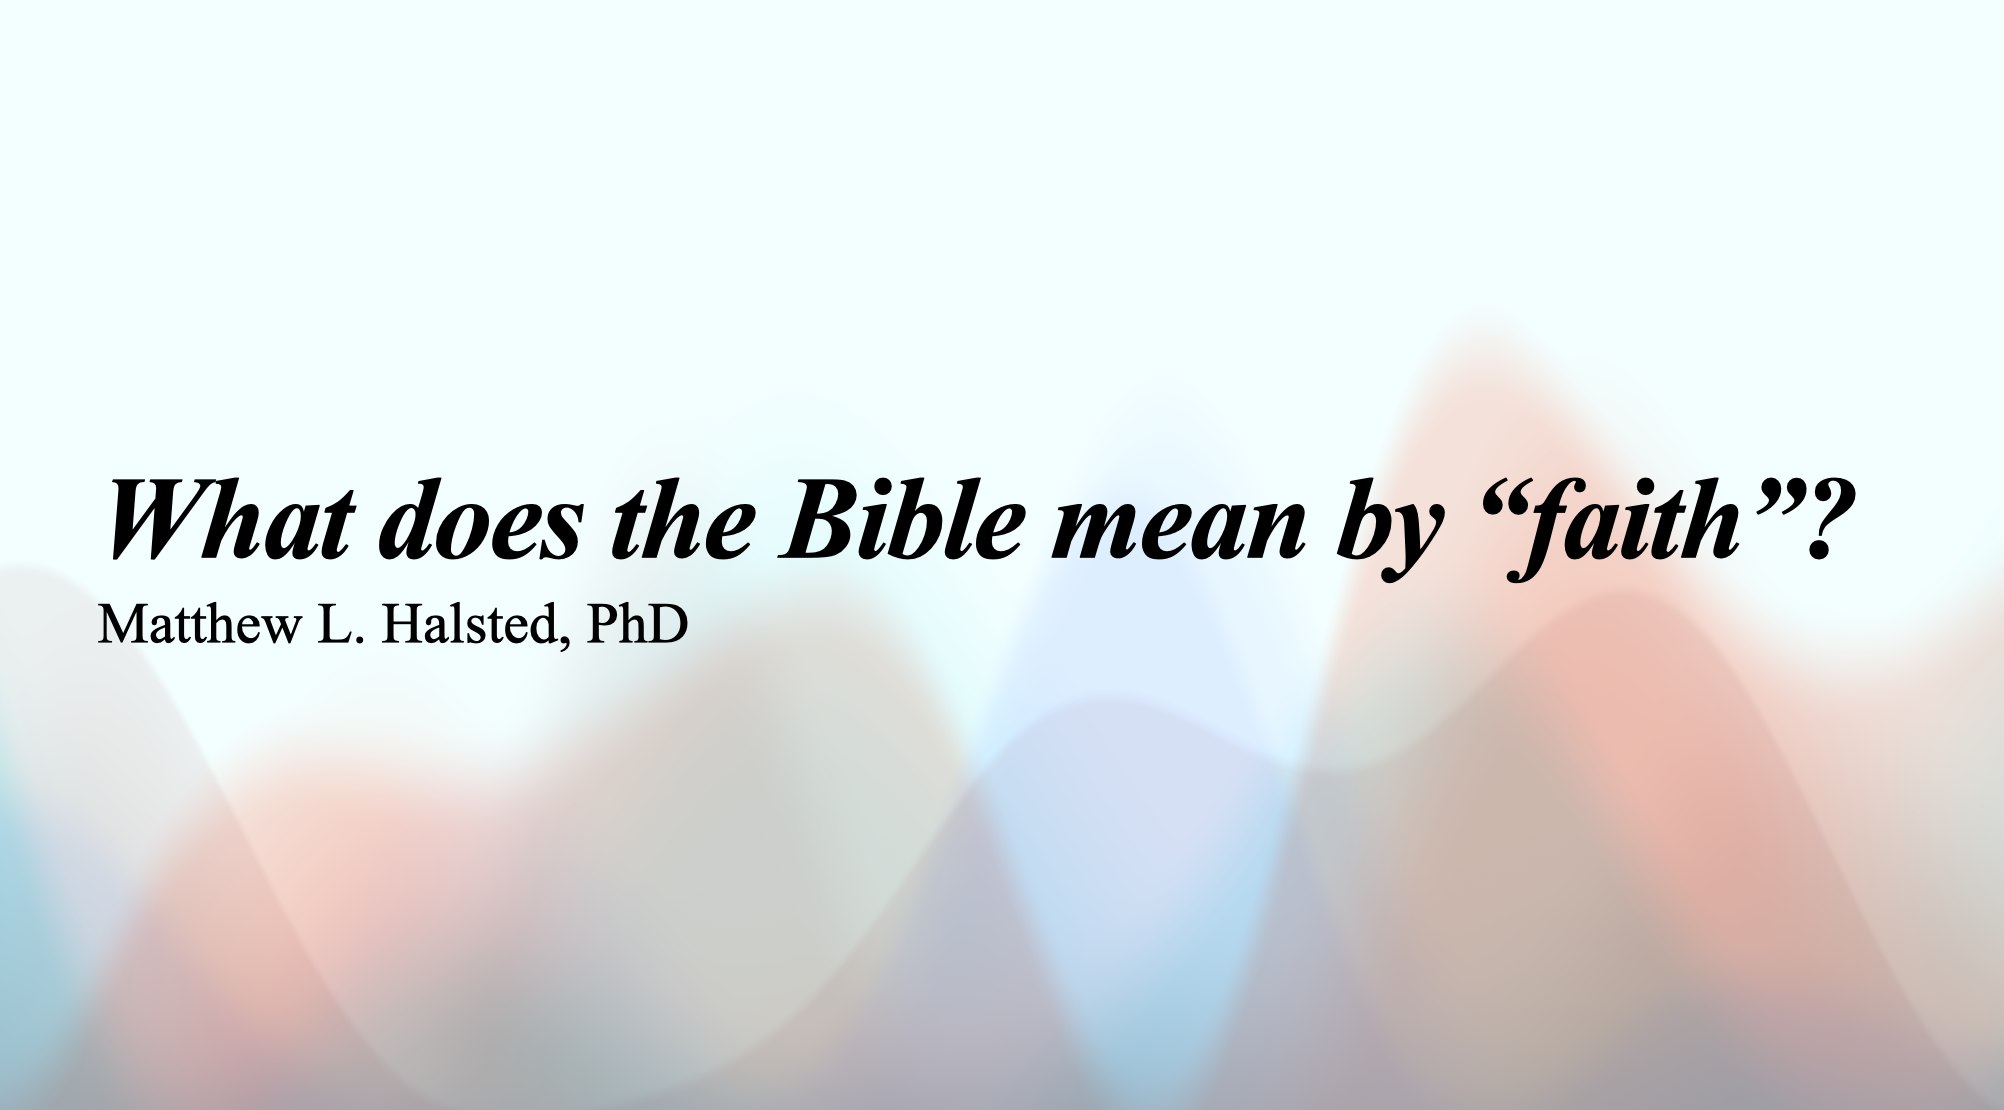 What does the Bible mean by “faith”?